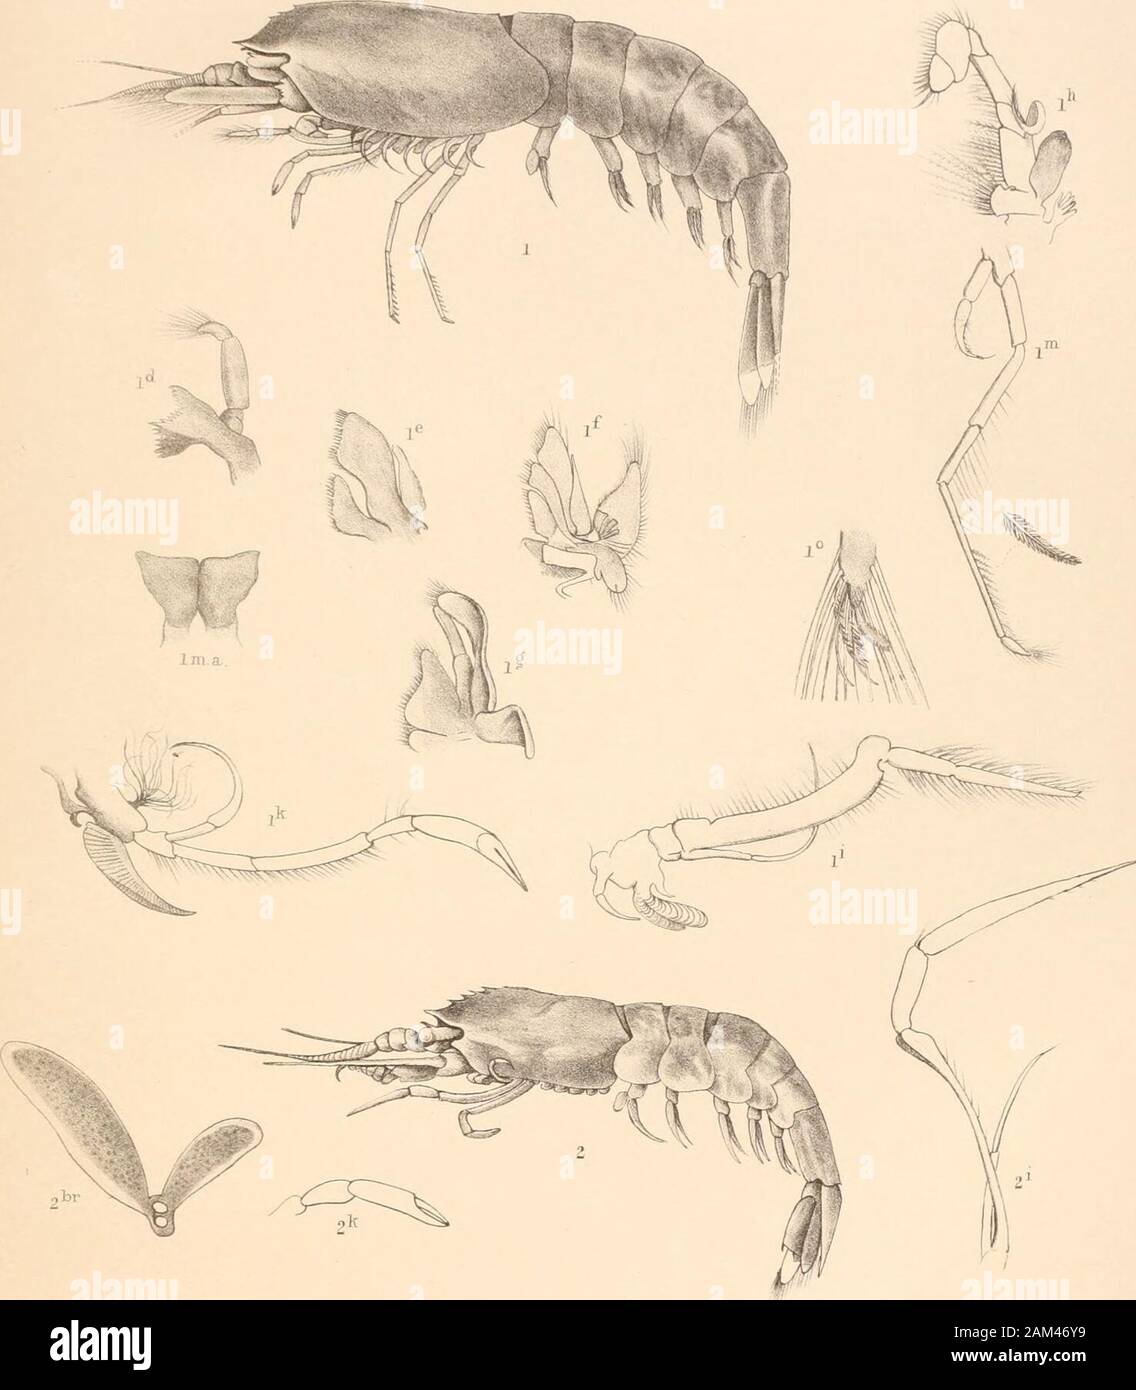 Report on the scientific results of the voyage of H.M.SChallenger during the years 1873-76 : under the command of Captain George SNares, R.N., F.R.Sand Captain Frank Turle Thomson, R.N. . I I.TROPIOCARIS PLANIPES. 3. HYMENODORA DUPLEX 2. D° TENUIPES. 4. D° ROSTRATA 5 HYMENODORA MOLLIS . HsrVharl PLATE CXXXVII. (ZOOL. CHALL. EXP. PART LII. 1888.) Fff. 6 PLATE CXXXVII. Hymenodora glauca (p. 847).Fig. 1. Lateral view ; enlarged twice.Id. Mandible.lm.a. Metastoma.le. First siagnopod.If Second siagnopod.lg. Third siagnopod.lh. First gnathopod.li. Second gnathopod.Ik. First pereiopod.m. Third perei Stock Photo